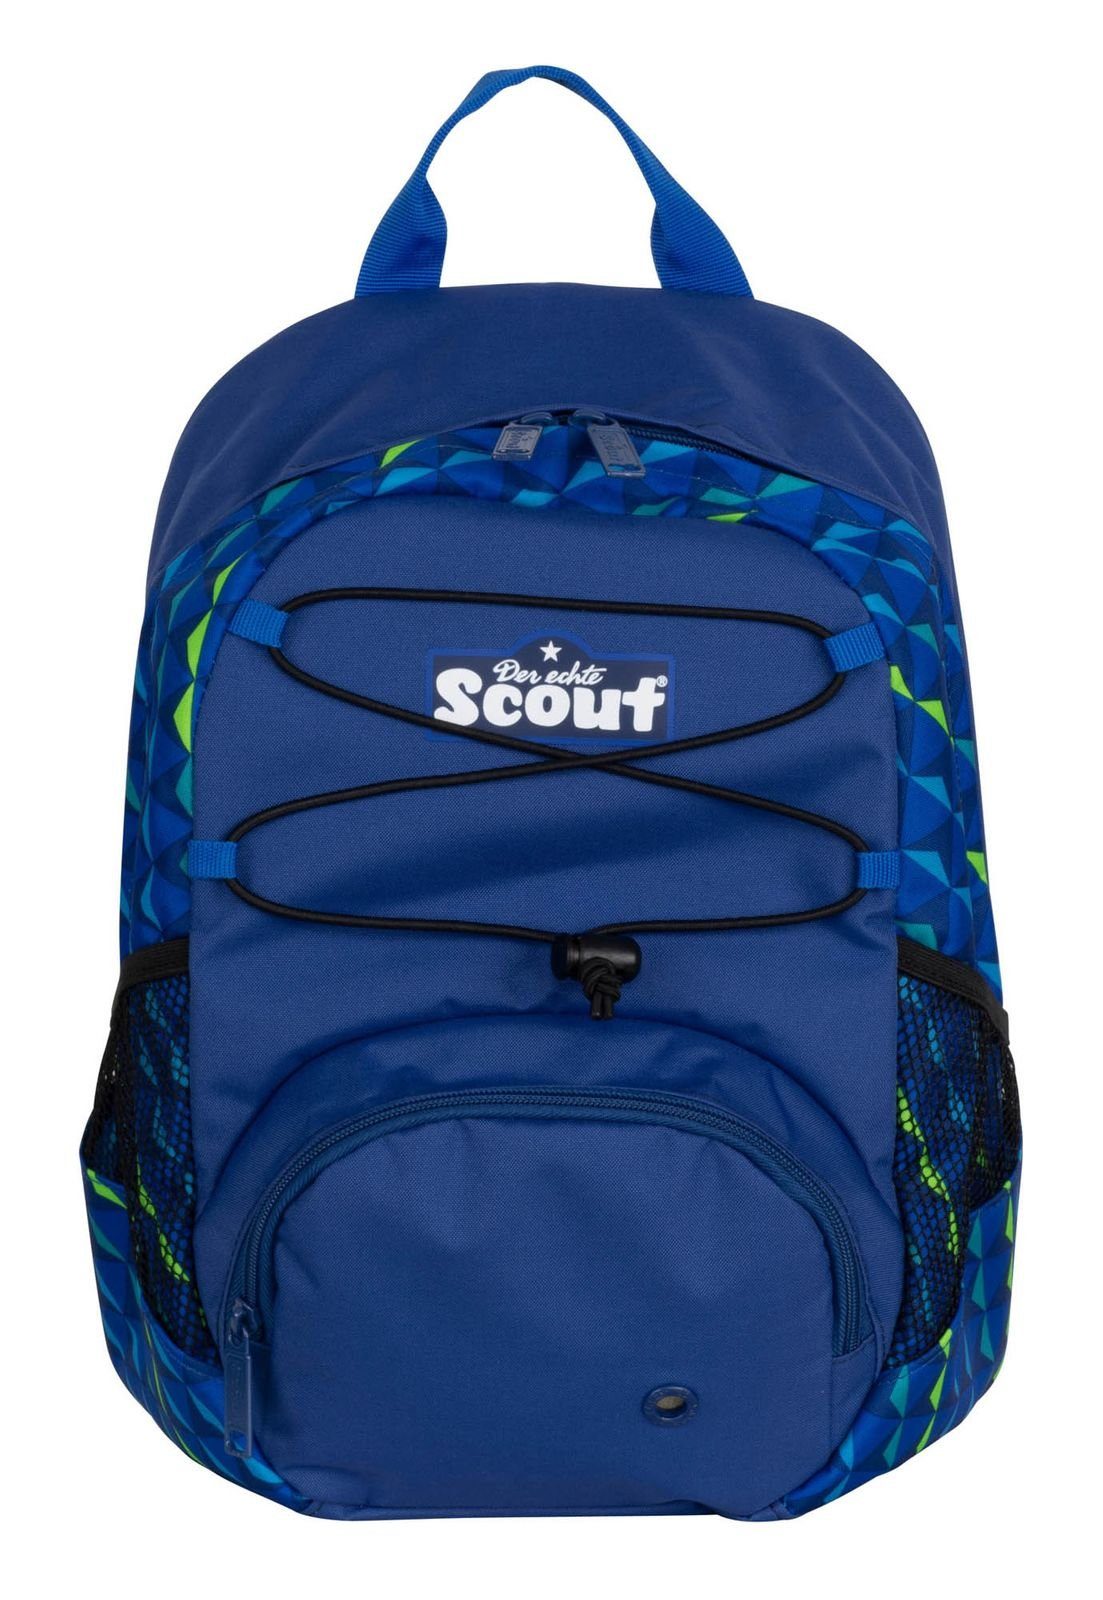 Monsters Scout Flying Rucksack